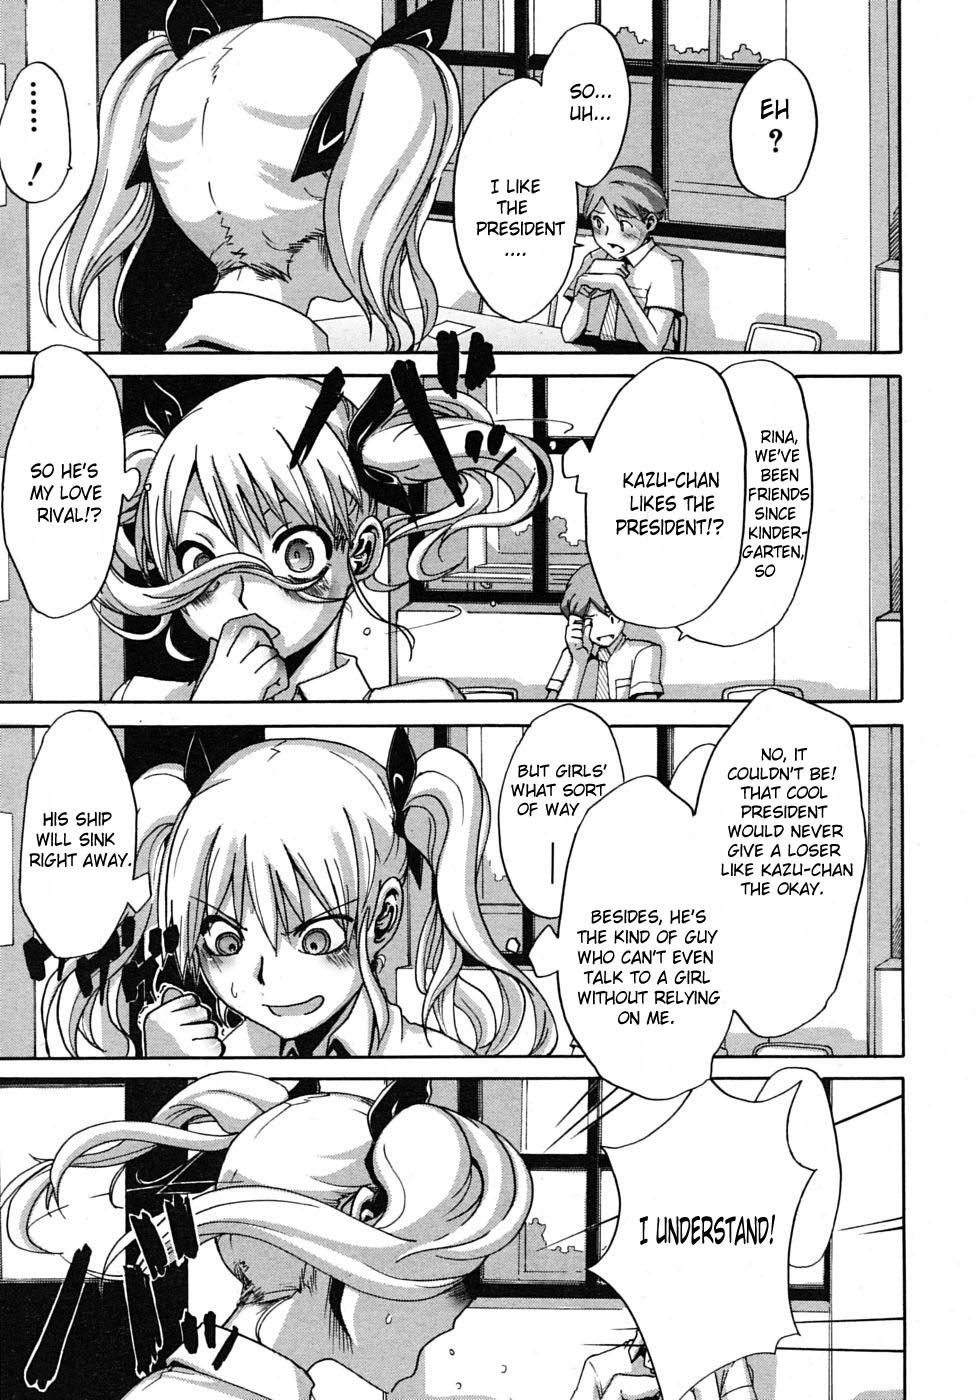 Vaginal Seito Kaichou wa Aisare-kei | The Student Council President Is Loved 18 Porn - Page 9